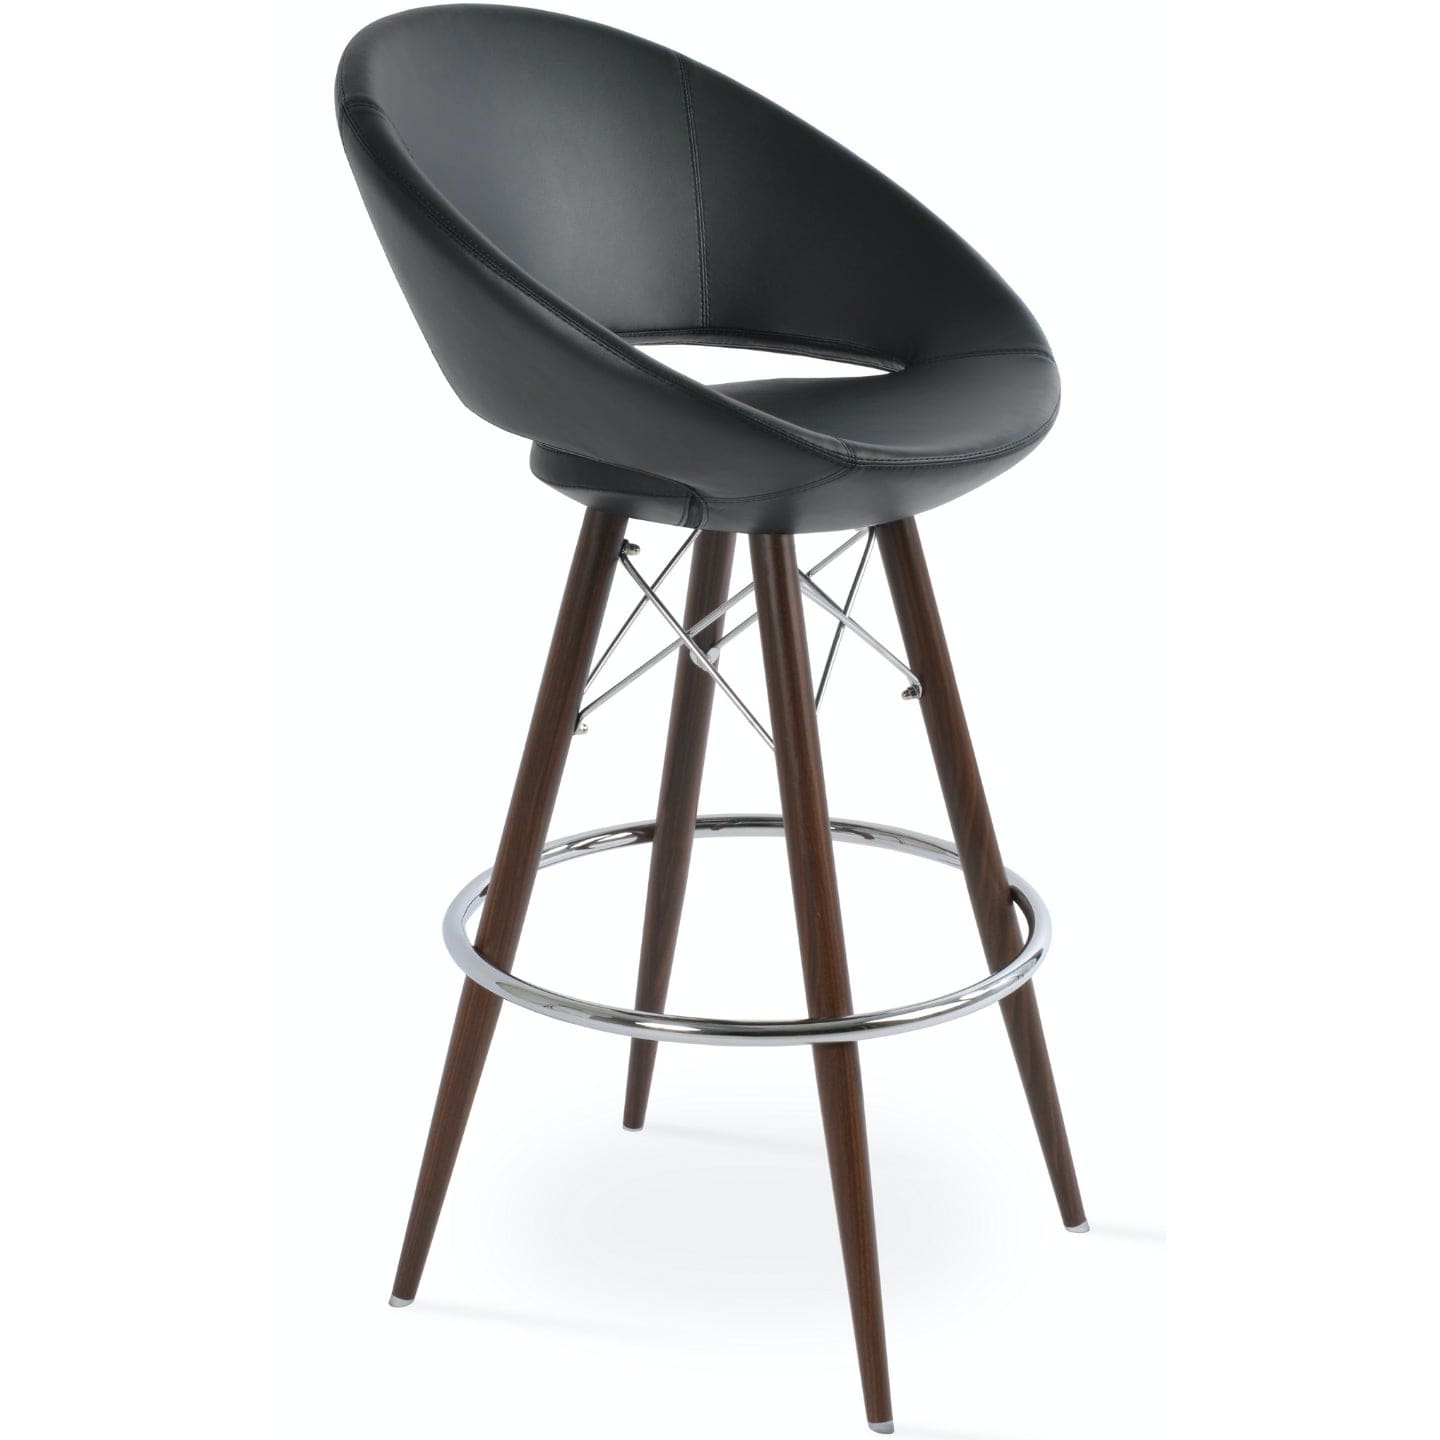 Soho Concept crescent-mw-walnut-metal-base-faux-leather-seat-kitchen-stool-in-black